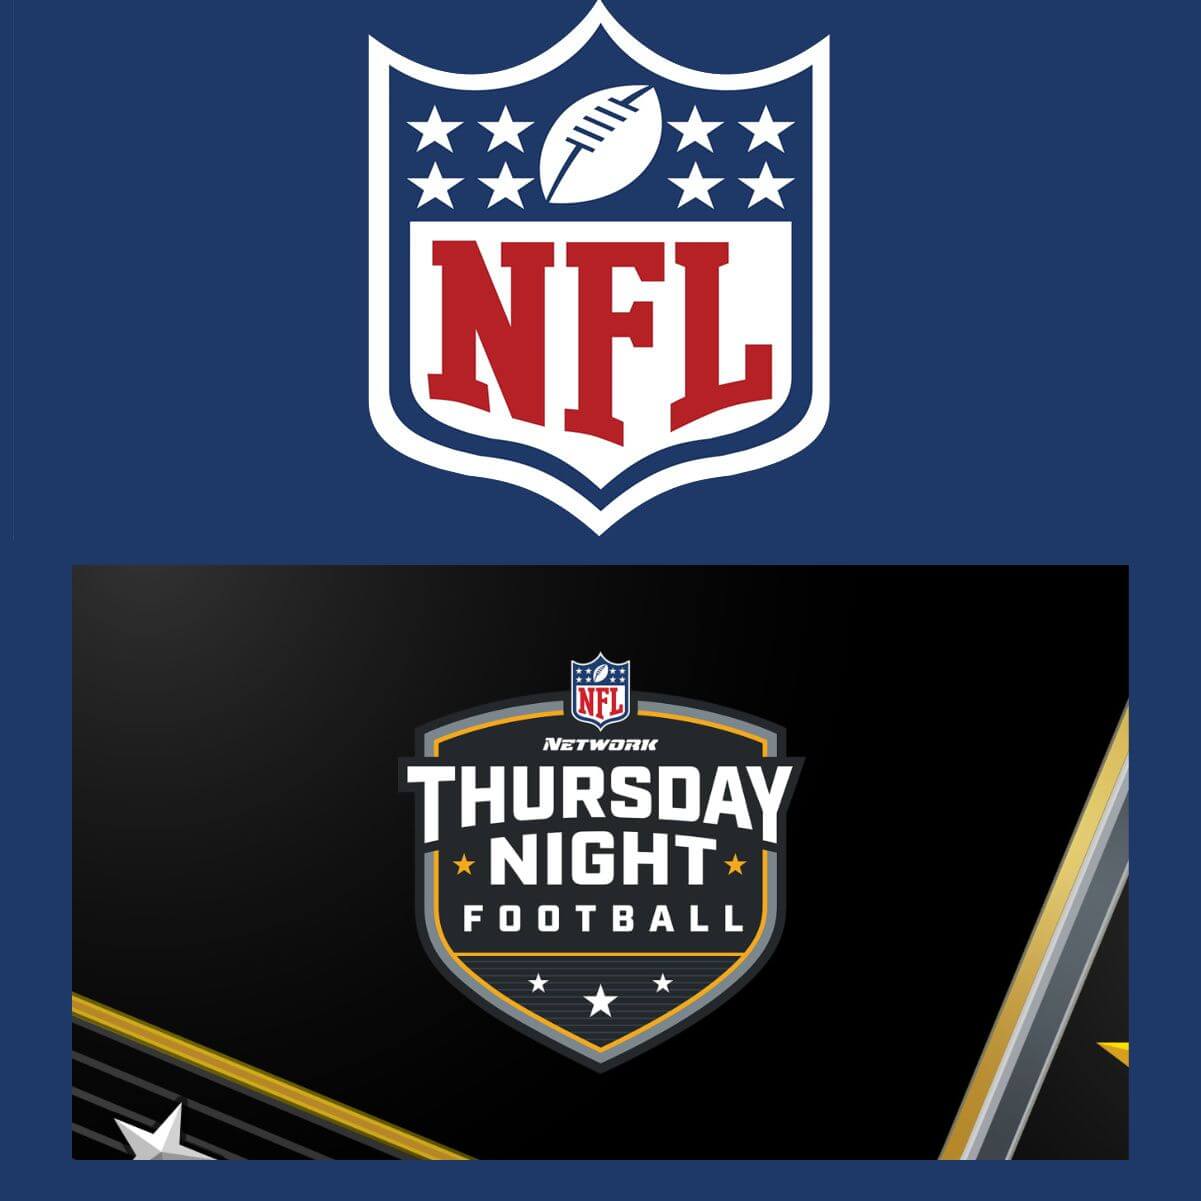 How to Watch NFL Thursday Night Football from Anywhere.